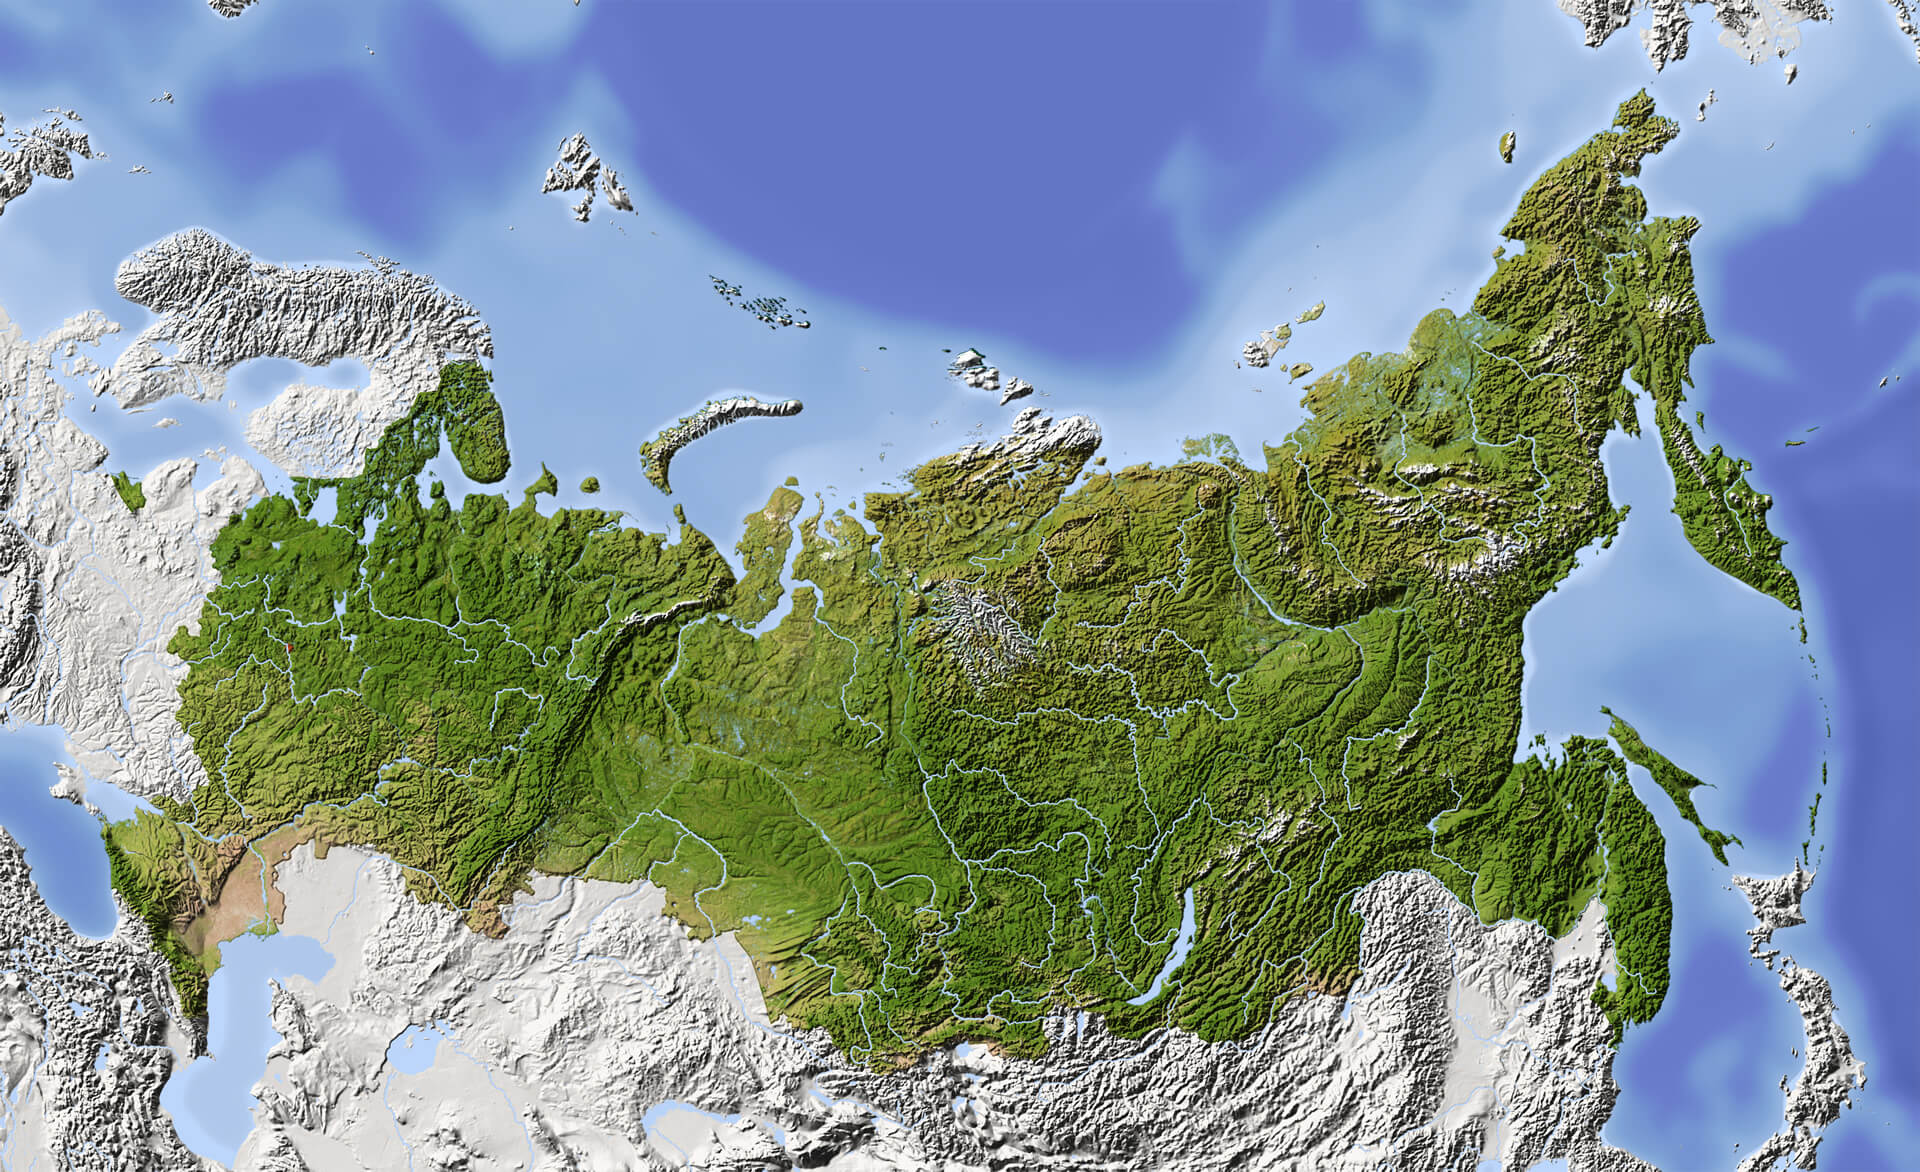 Shaded Relief Map of Russian Federation